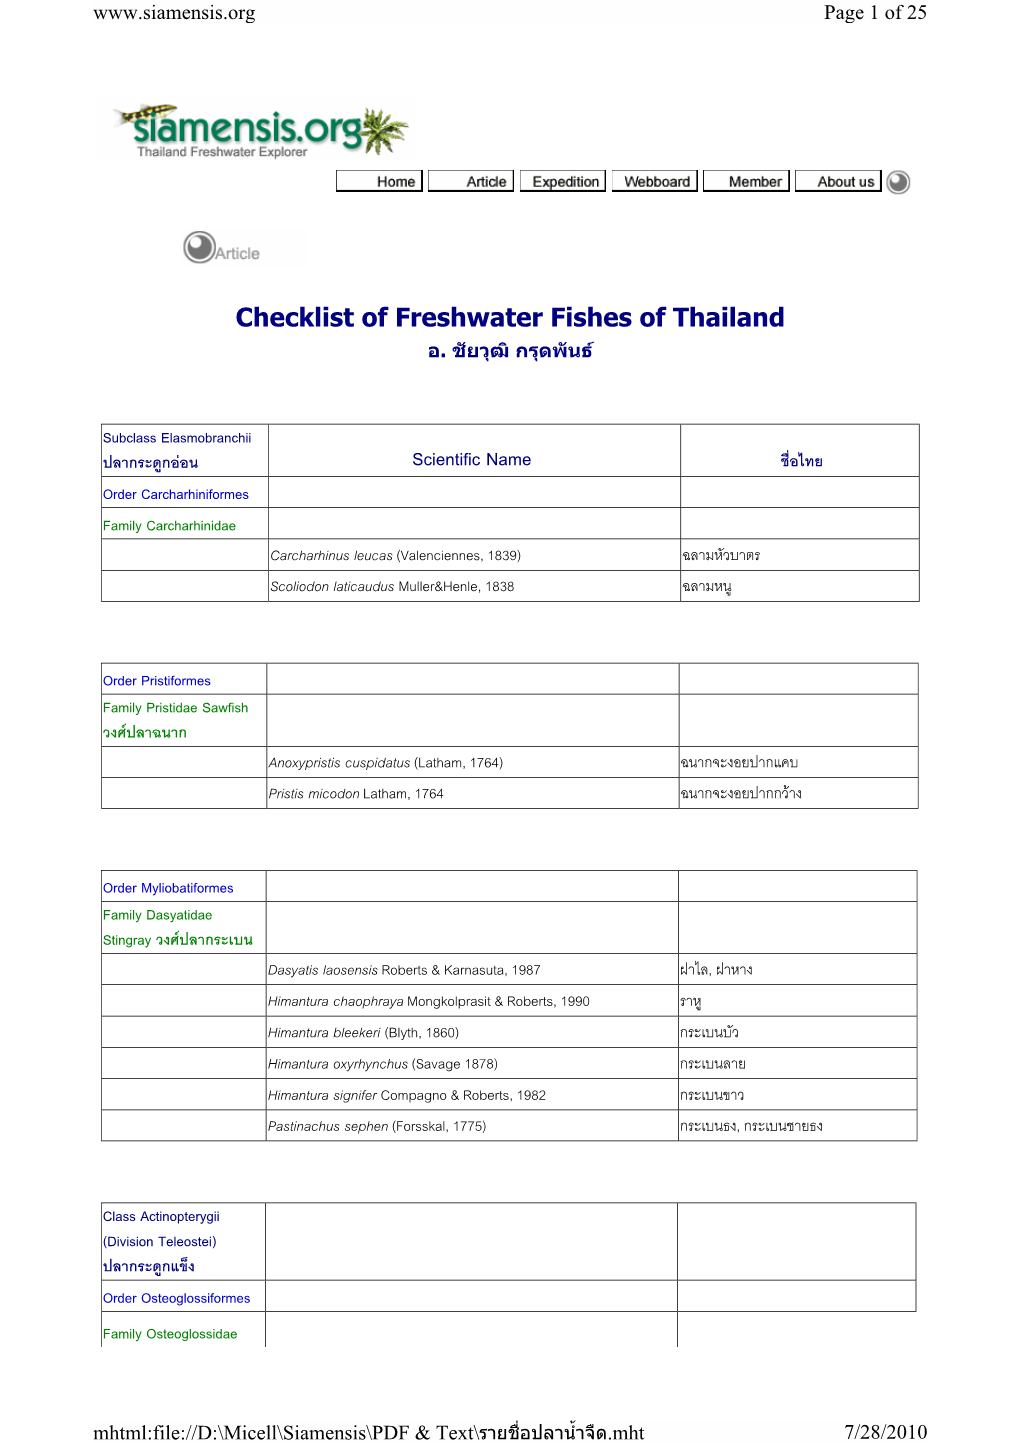 Checklist of Freshwater Fishes of Thailand Y2005